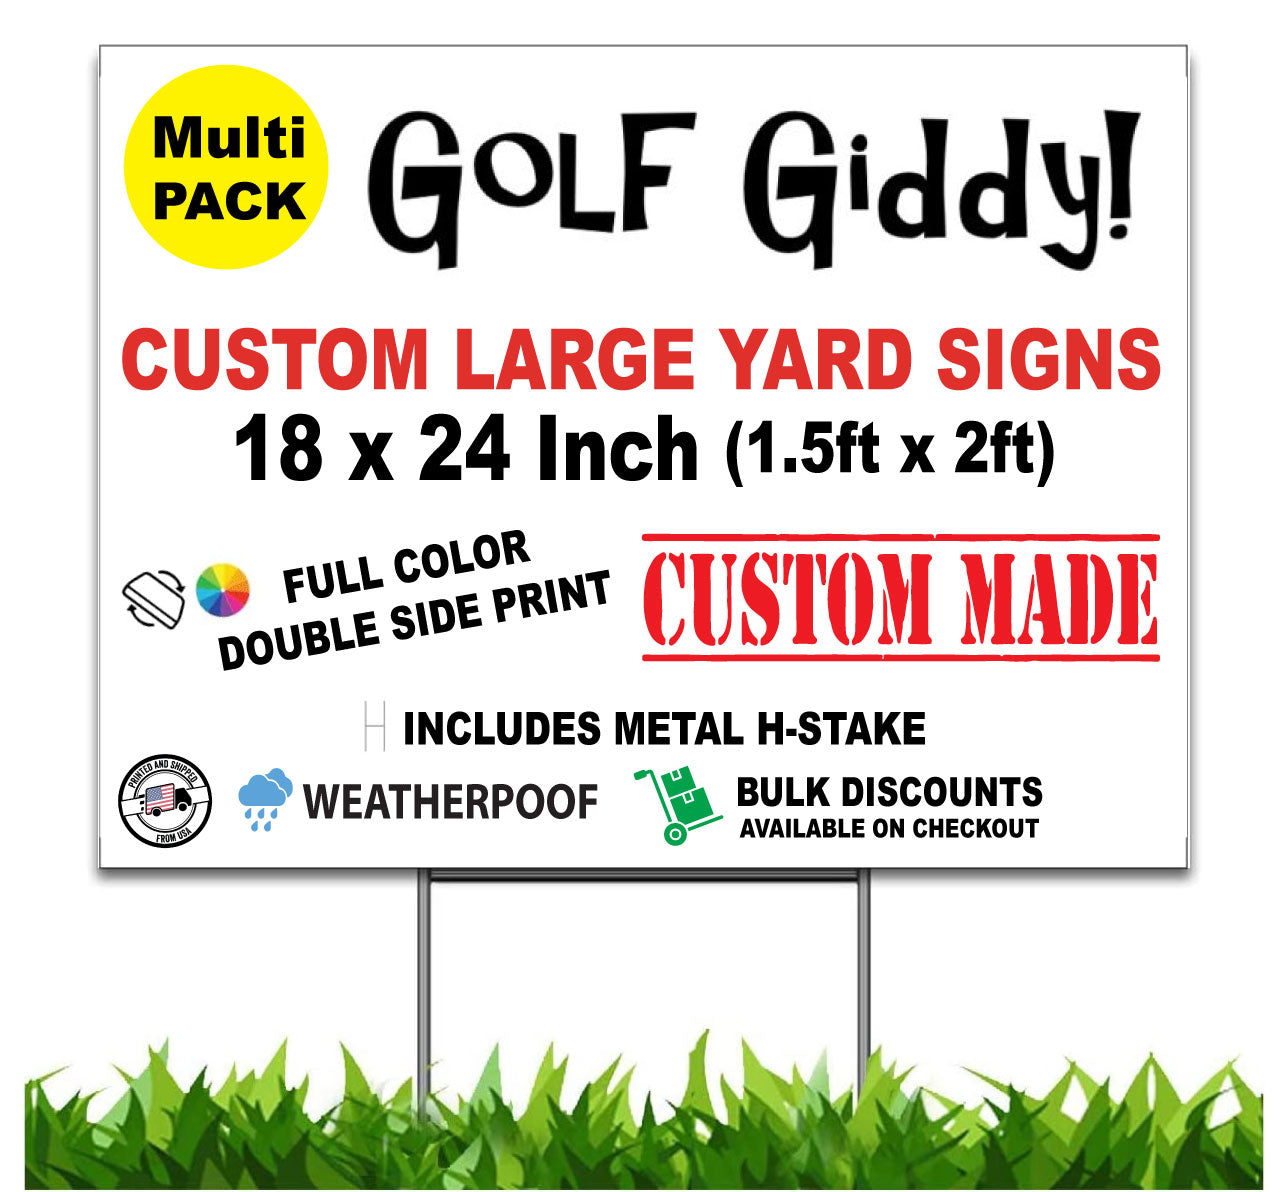 Golf Giddy Custom Yard Sign, Personalize Yard Sign, 24 x 18 inch, Double Sided, H-Stake Included